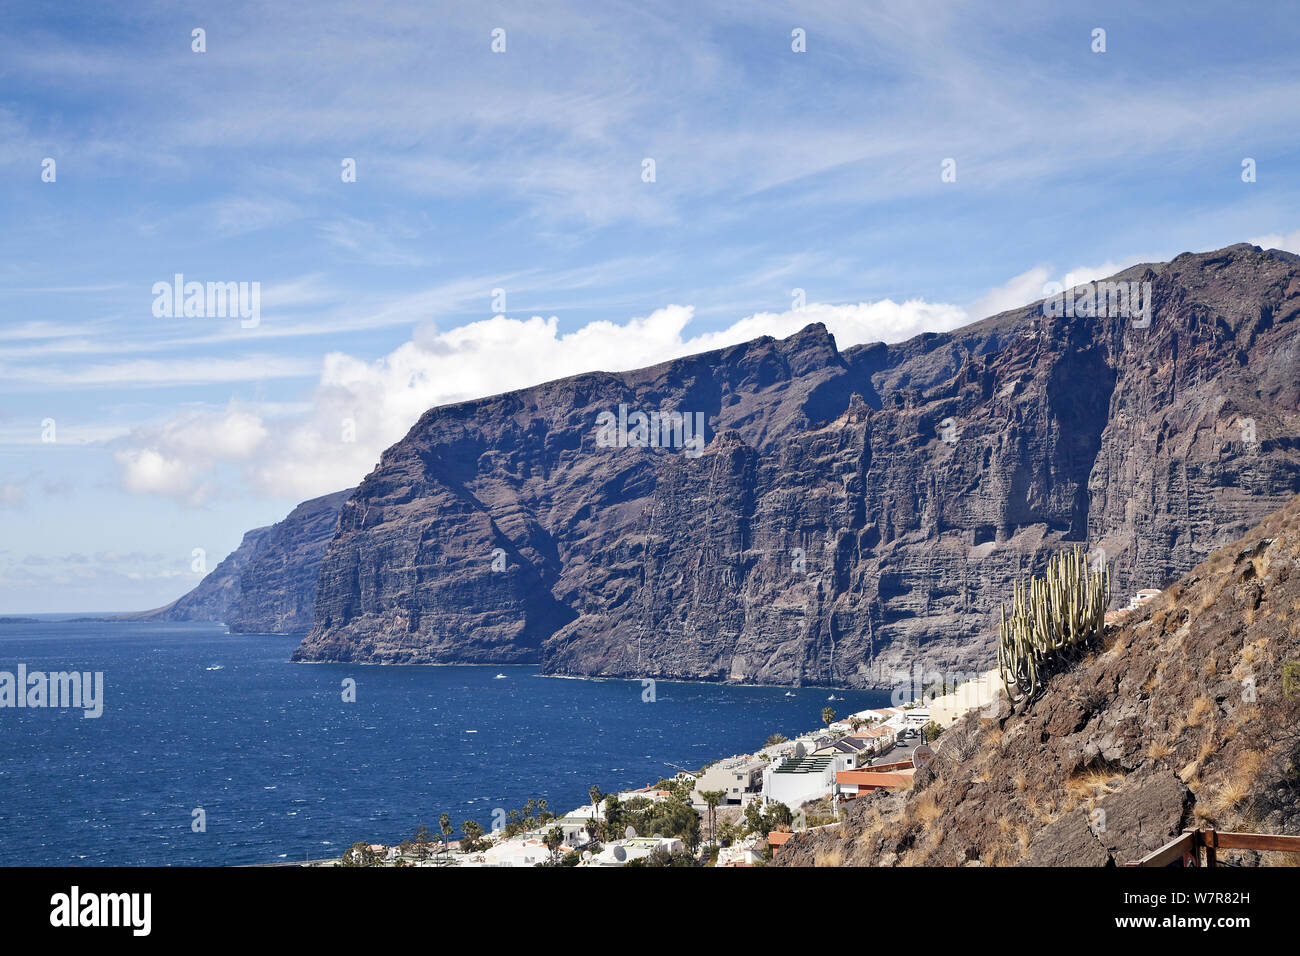 Los Gigantes cliffs, with Hercules club / Canary Island spurge (Euphorbia canariensis) on a hillside in the foreground, Tenerife, Canary Islands, Spain, March. Stock Photo